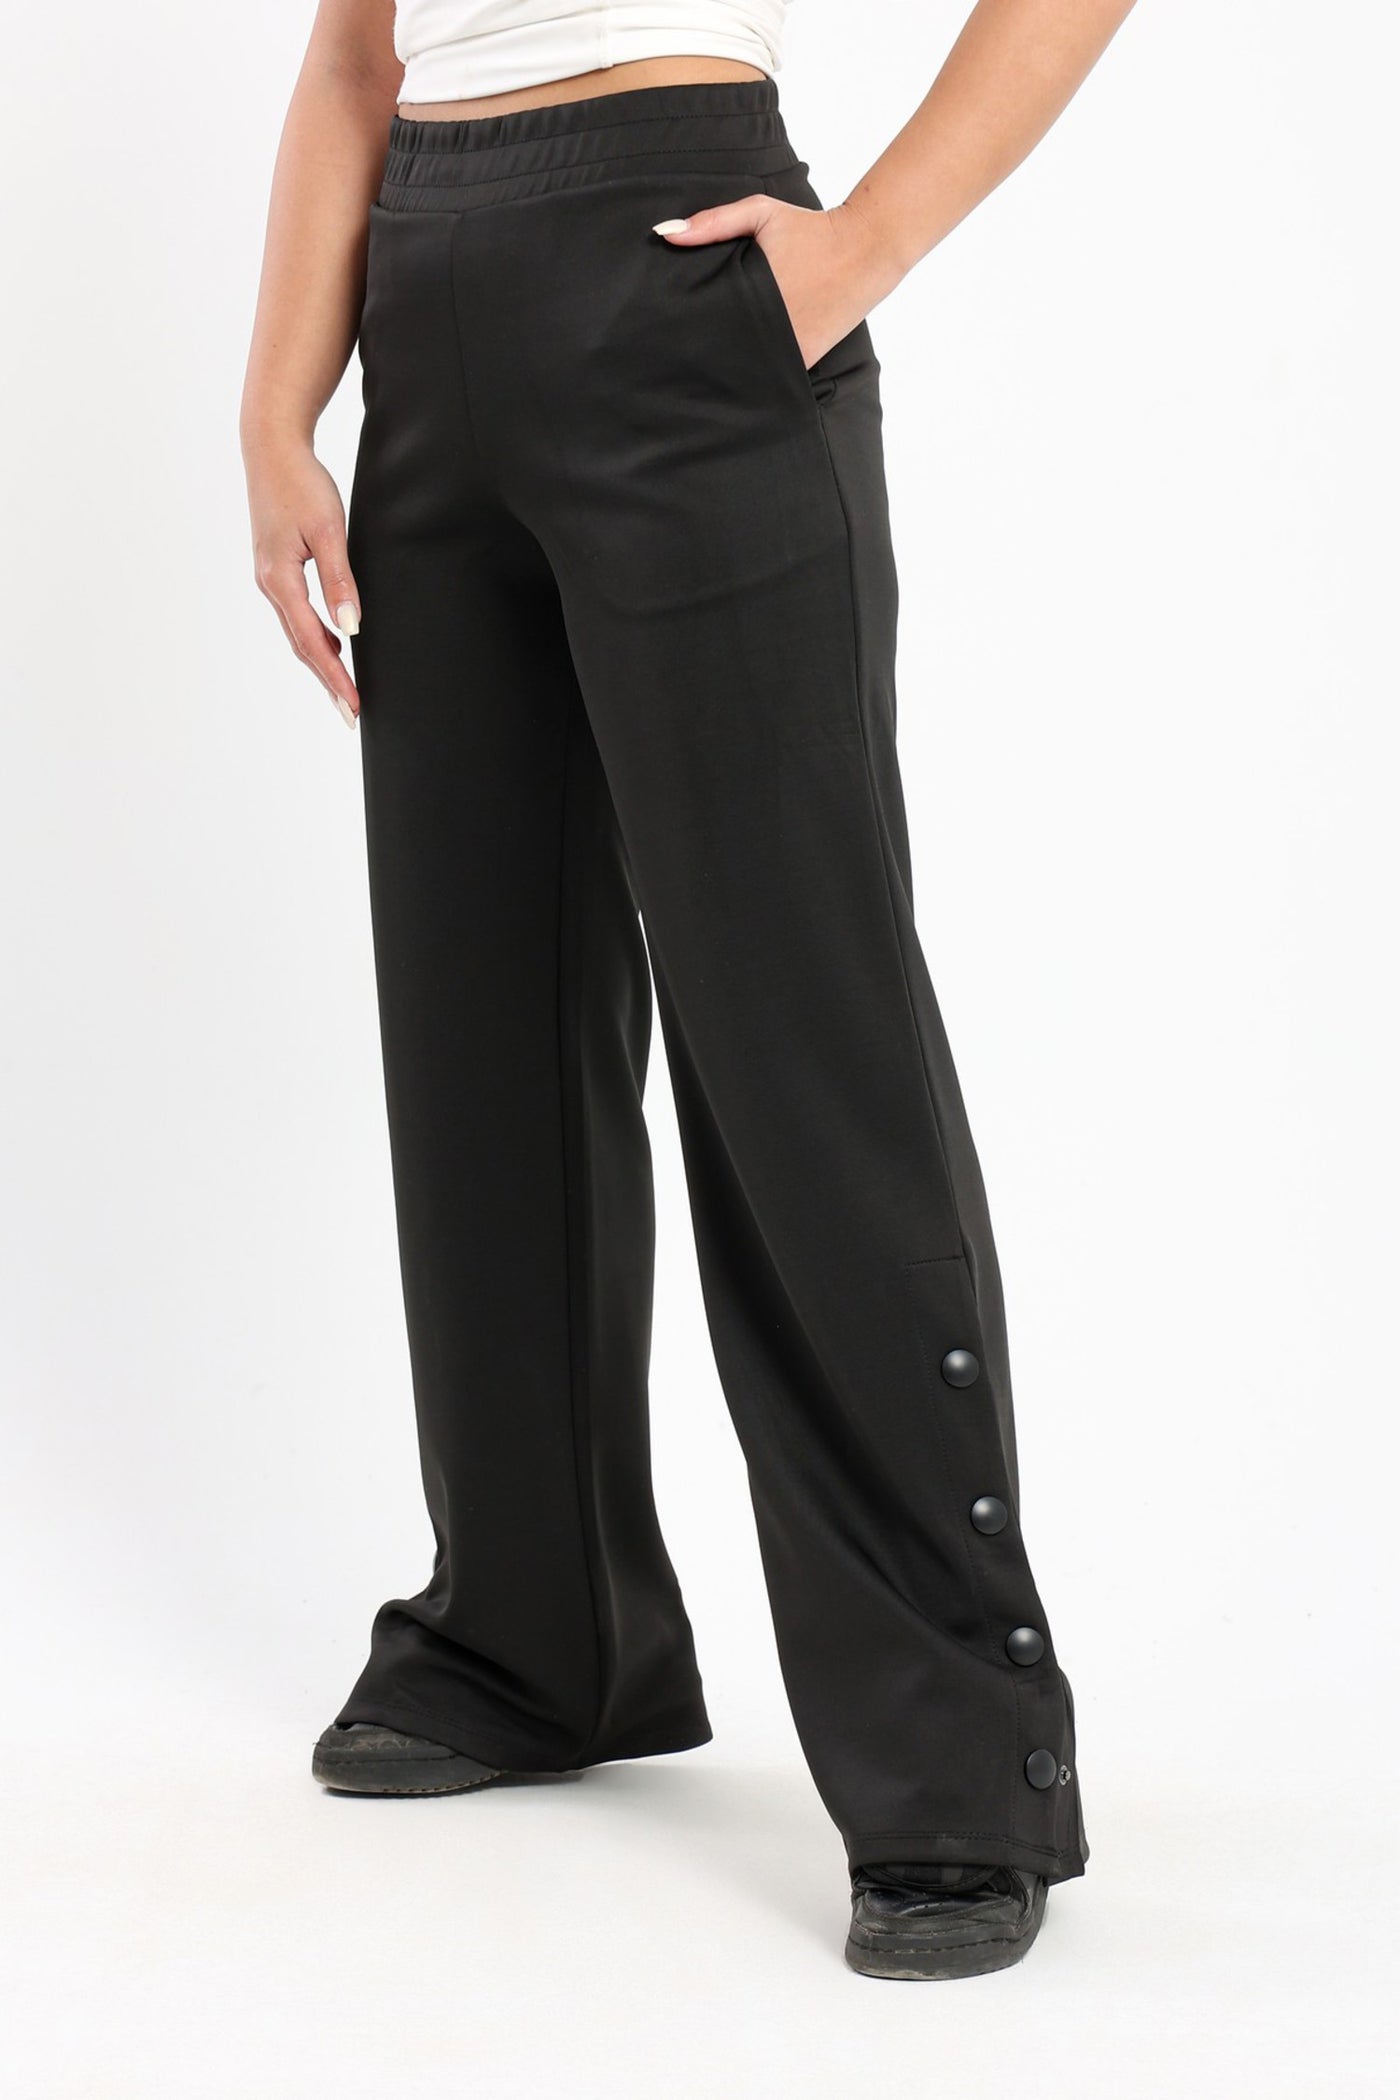 Pants - Straight Leg - Side Snap Buttons